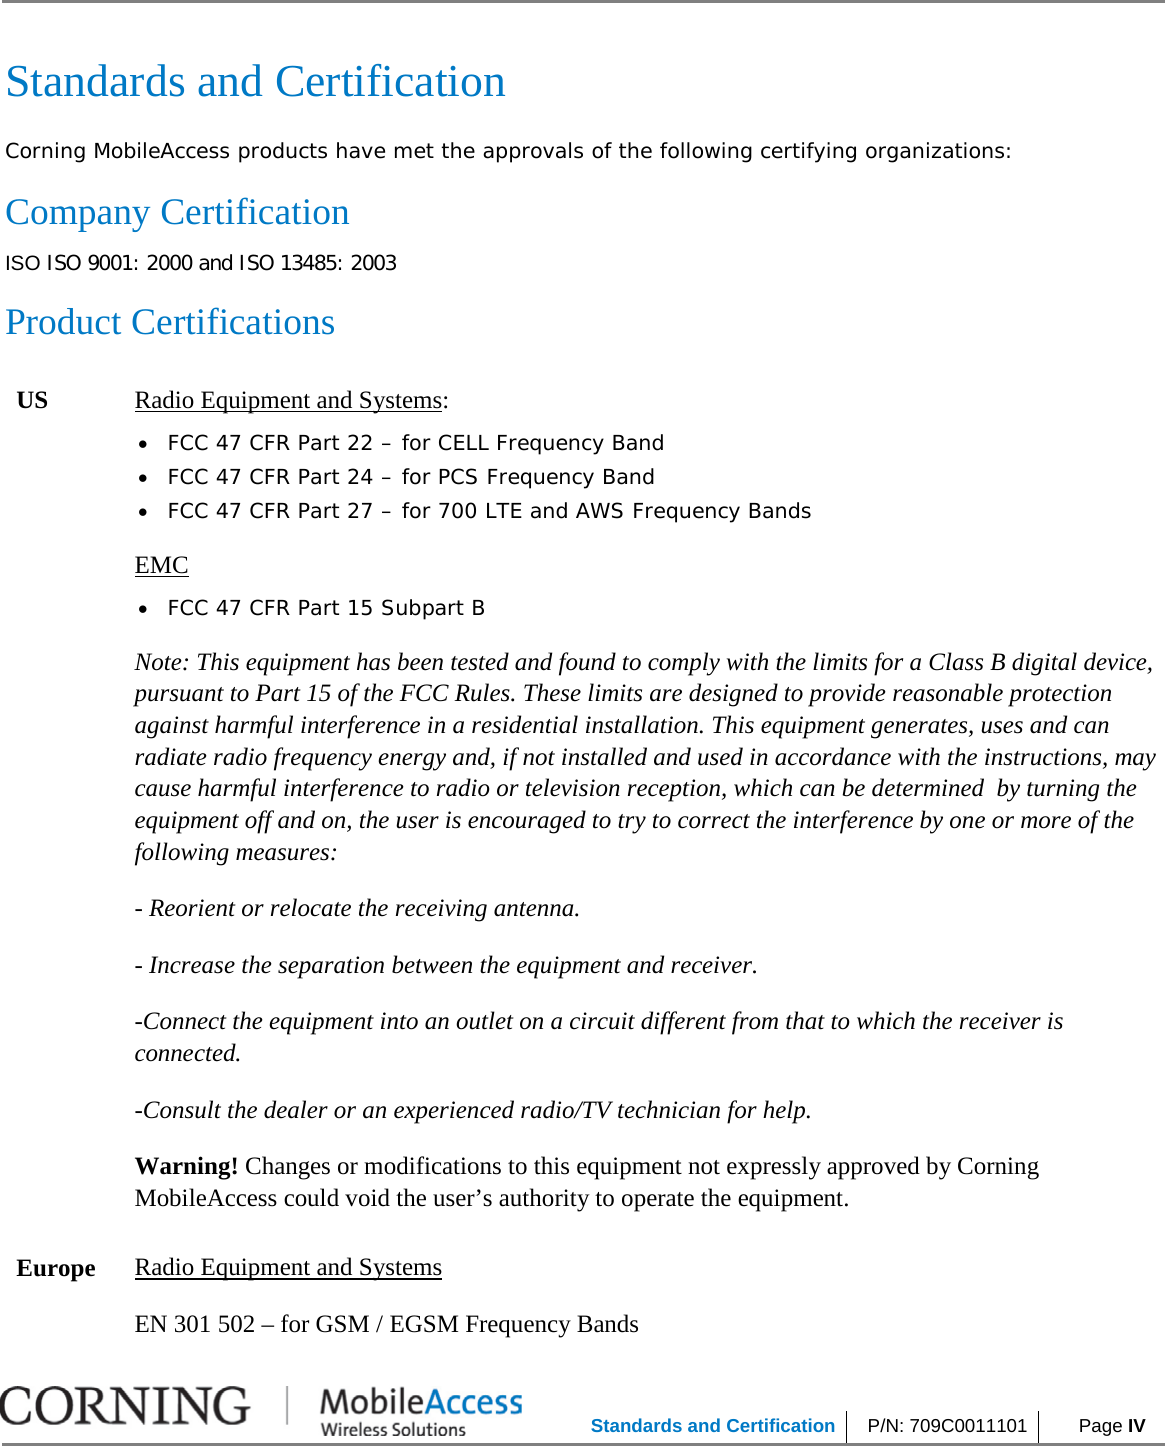            Standards and Certification P/N: 709C0011101  Page IV     Standards and Certification Corning MobileAccess products have met the approvals of the following certifying organizations: Company Certification ISO ISO 9001: 2000 and ISO 13485: 2003 Product Certifications US Radio Equipment and Systems: • FCC 47 CFR Part 22 – for CELL Frequency Band • FCC 47 CFR Part 24 – for PCS Frequency Band • FCC 47 CFR Part 27 – for 700 LTE and AWS Frequency Bands EMC • FCC 47 CFR Part 15 Subpart B Note: This equipment has been tested and found to comply with the limits for a Class B digital device, pursuant to Part 15 of the FCC Rules. These limits are designed to provide reasonable protection against harmful interference in a residential installation. This equipment generates, uses and can radiate radio frequency energy and, if not installed and used in accordance with the instructions, may cause harmful interference to radio or television reception, which can be determined  by turning the equipment off and on, the user is encouraged to try to correct the interference by one or more of the following measures: - Reorient or relocate the receiving antenna. - Increase the separation between the equipment and receiver. -Connect the equipment into an outlet on a circuit different from that to which the receiver is connected. -Consult the dealer or an experienced radio/TV technician for help. Warning! Changes or modifications to this equipment not expressly approved by Corning MobileAccess could void the user’s authority to operate the equipment. Europe Radio Equipment and Systems EN 301 502 – for GSM / EGSM Frequency Bands 